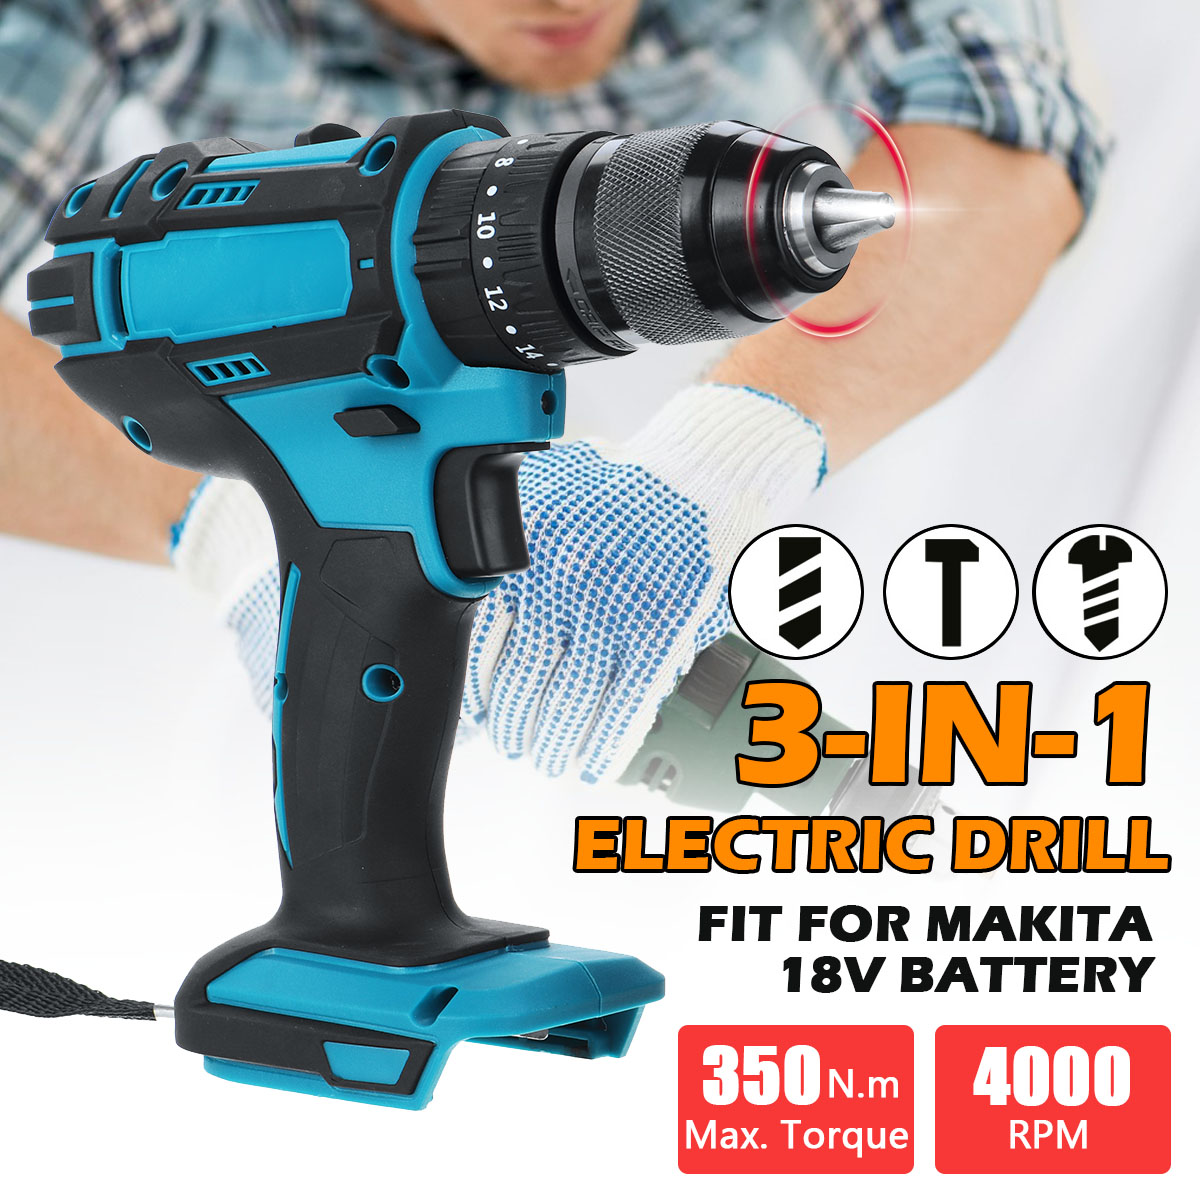 10mm-Chuck-Impact-Drill-350Nm-Cordless-Electric-Drill-For-Makita-18V-Battery-4000RPM-LED-Light-Power-1642853-2